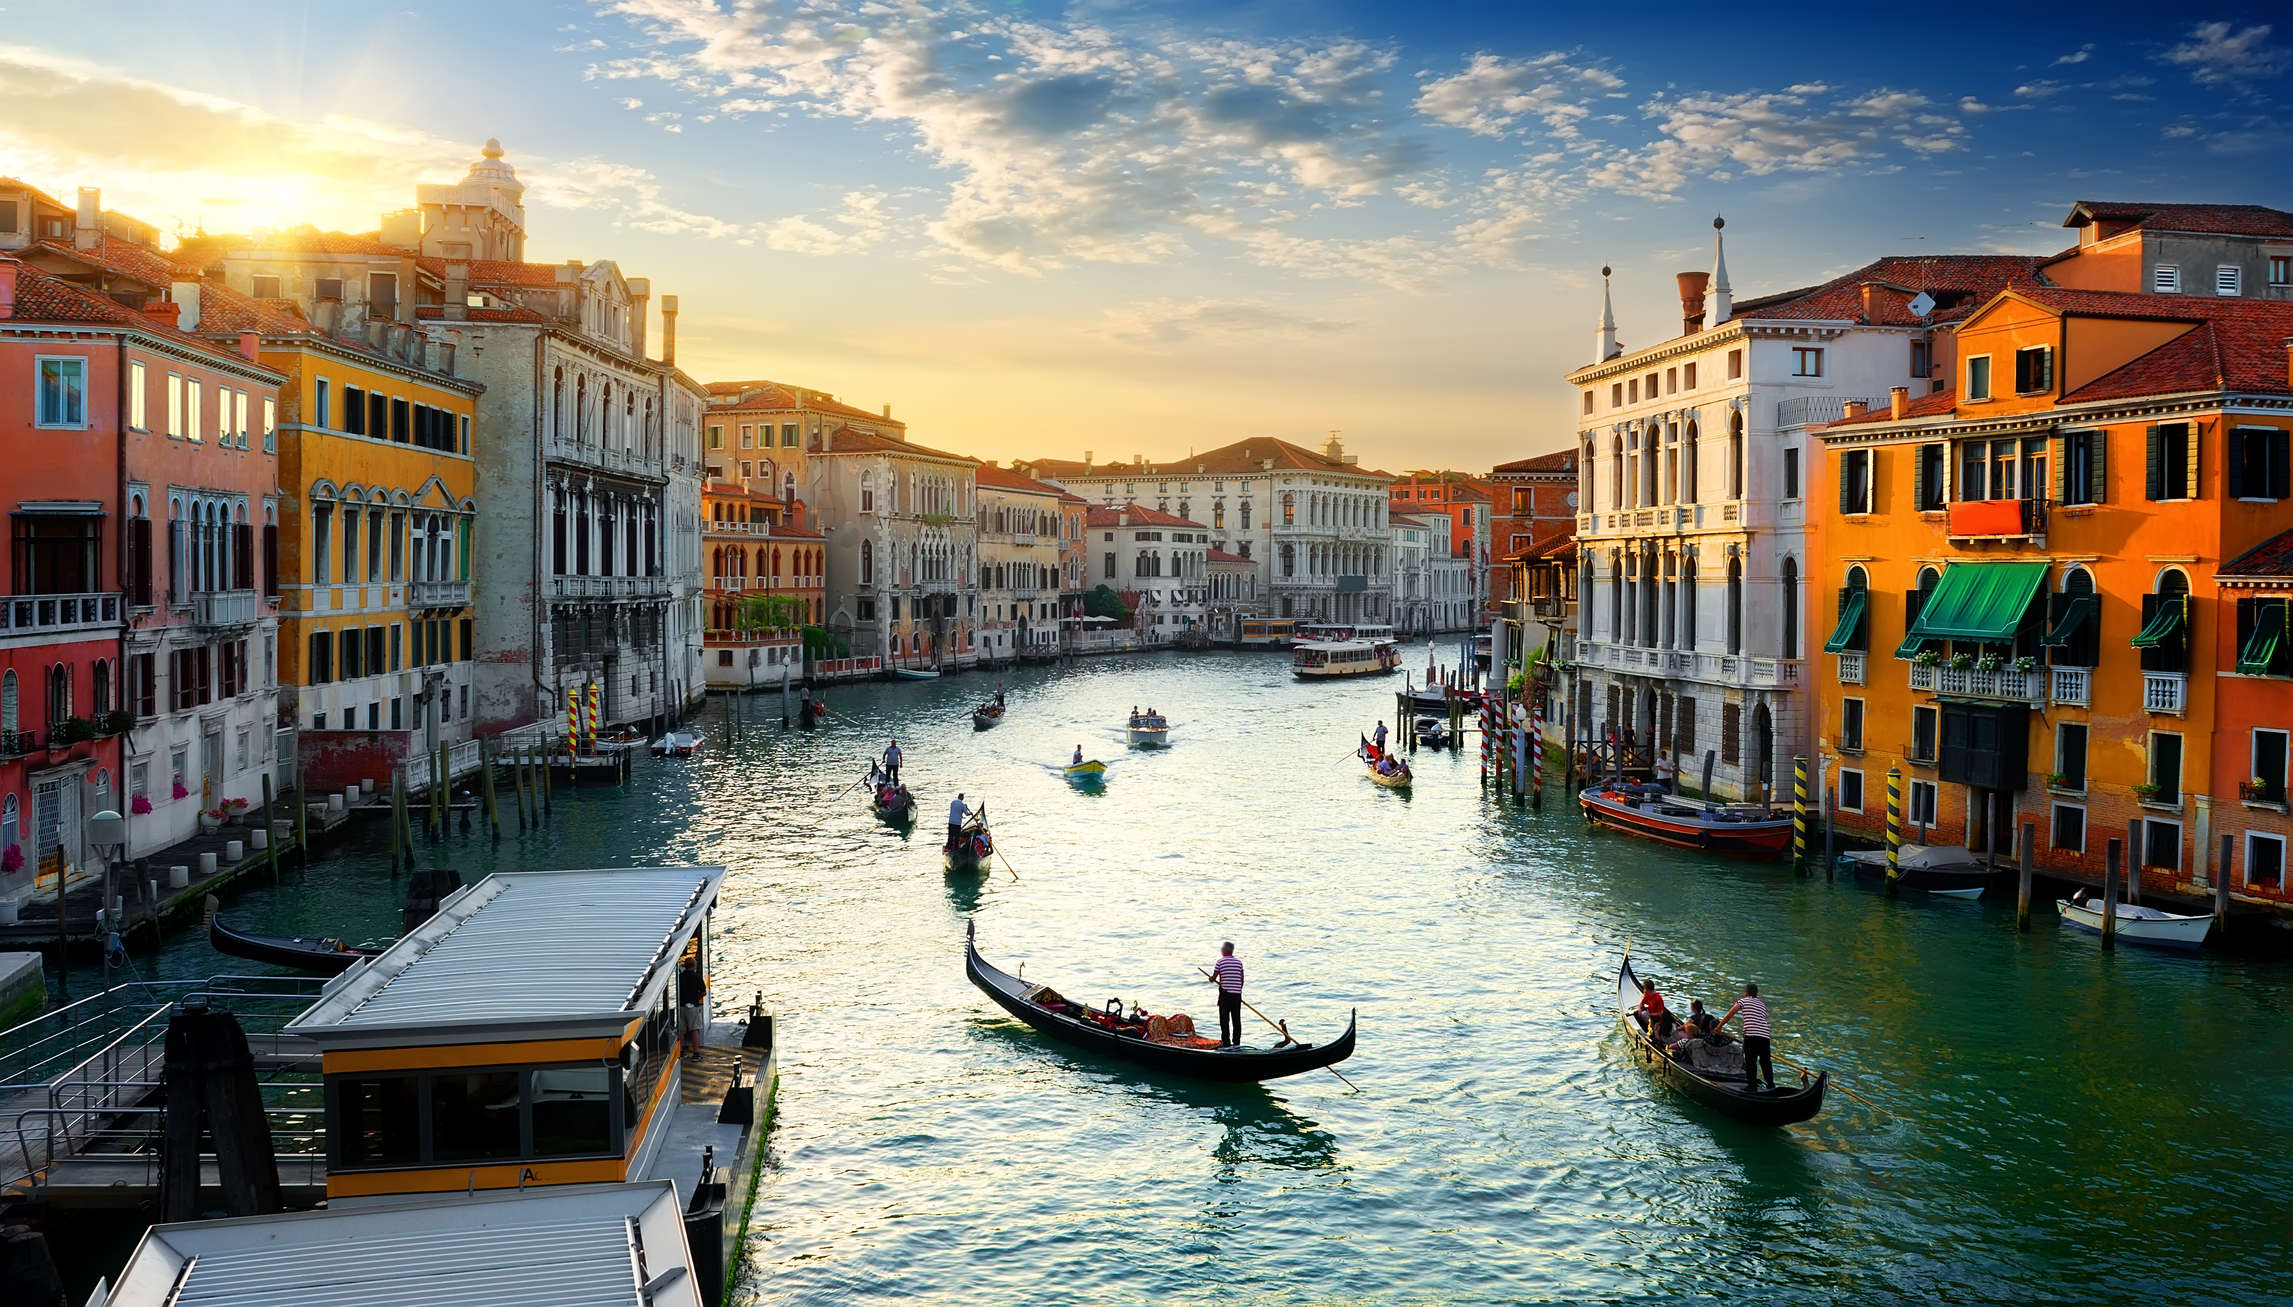 Venice manages to dodge UNESCO’s endangered list after ban on large ships